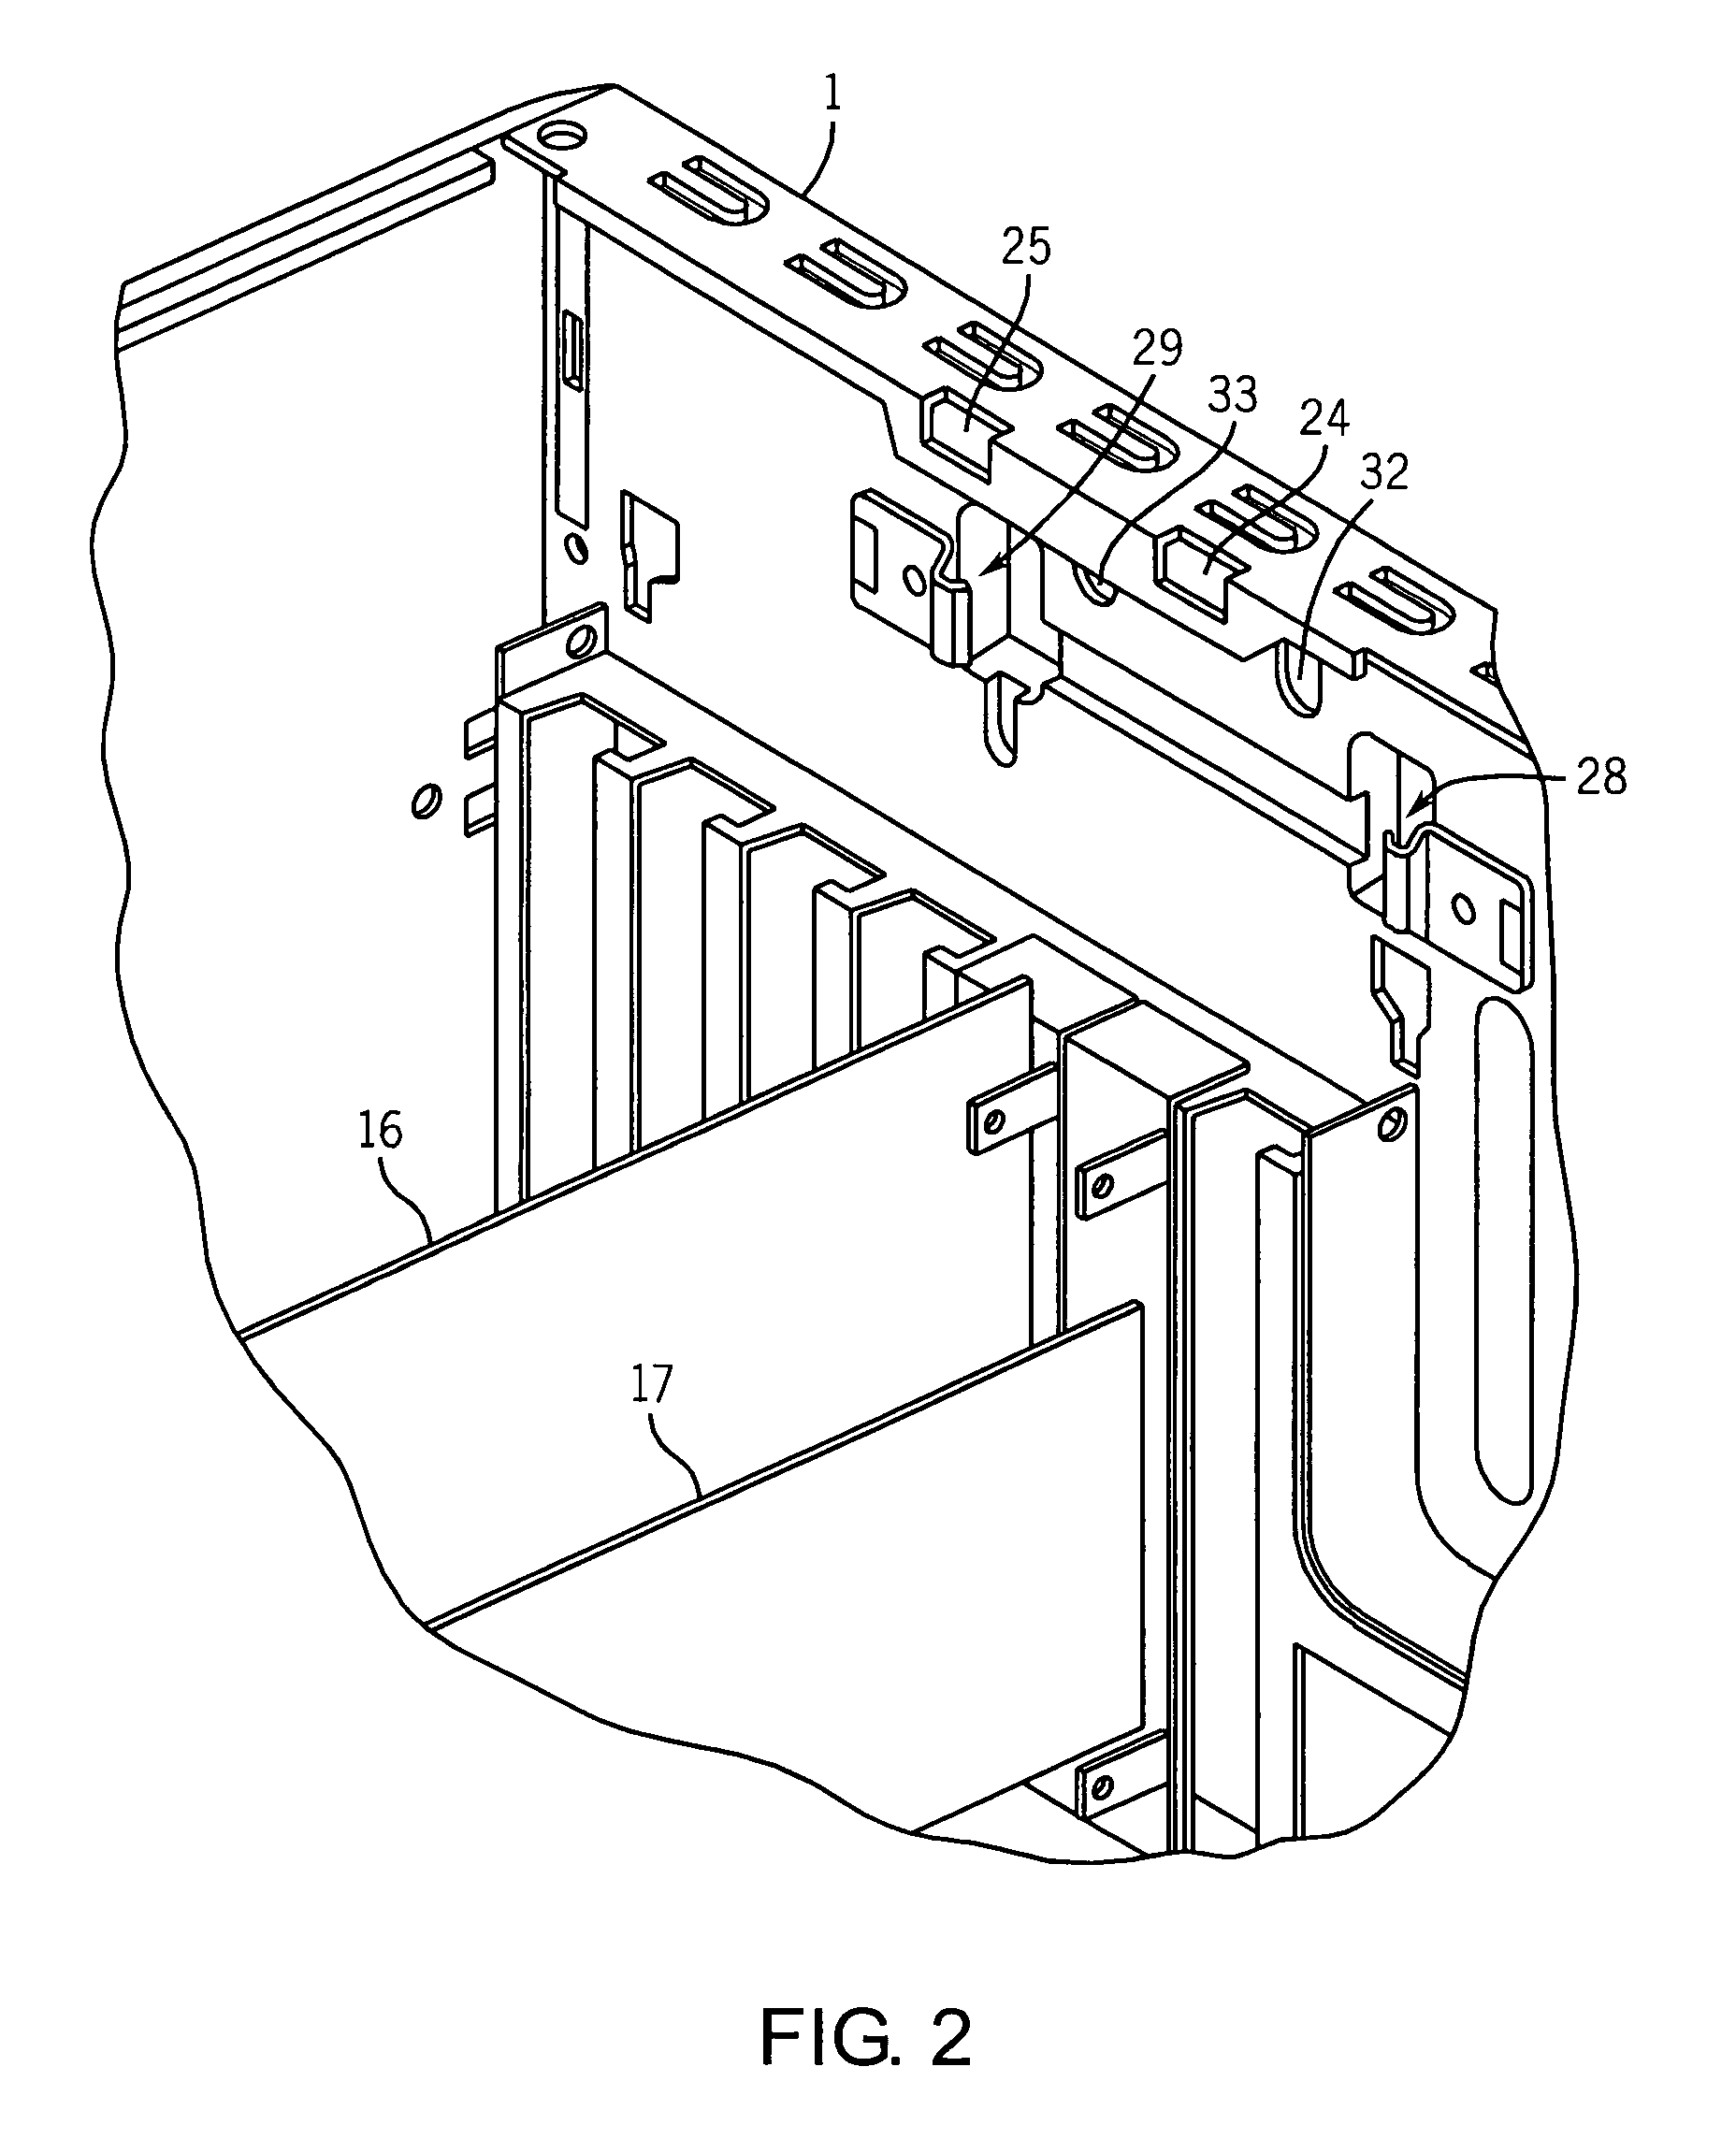 Expansion card support mechanism